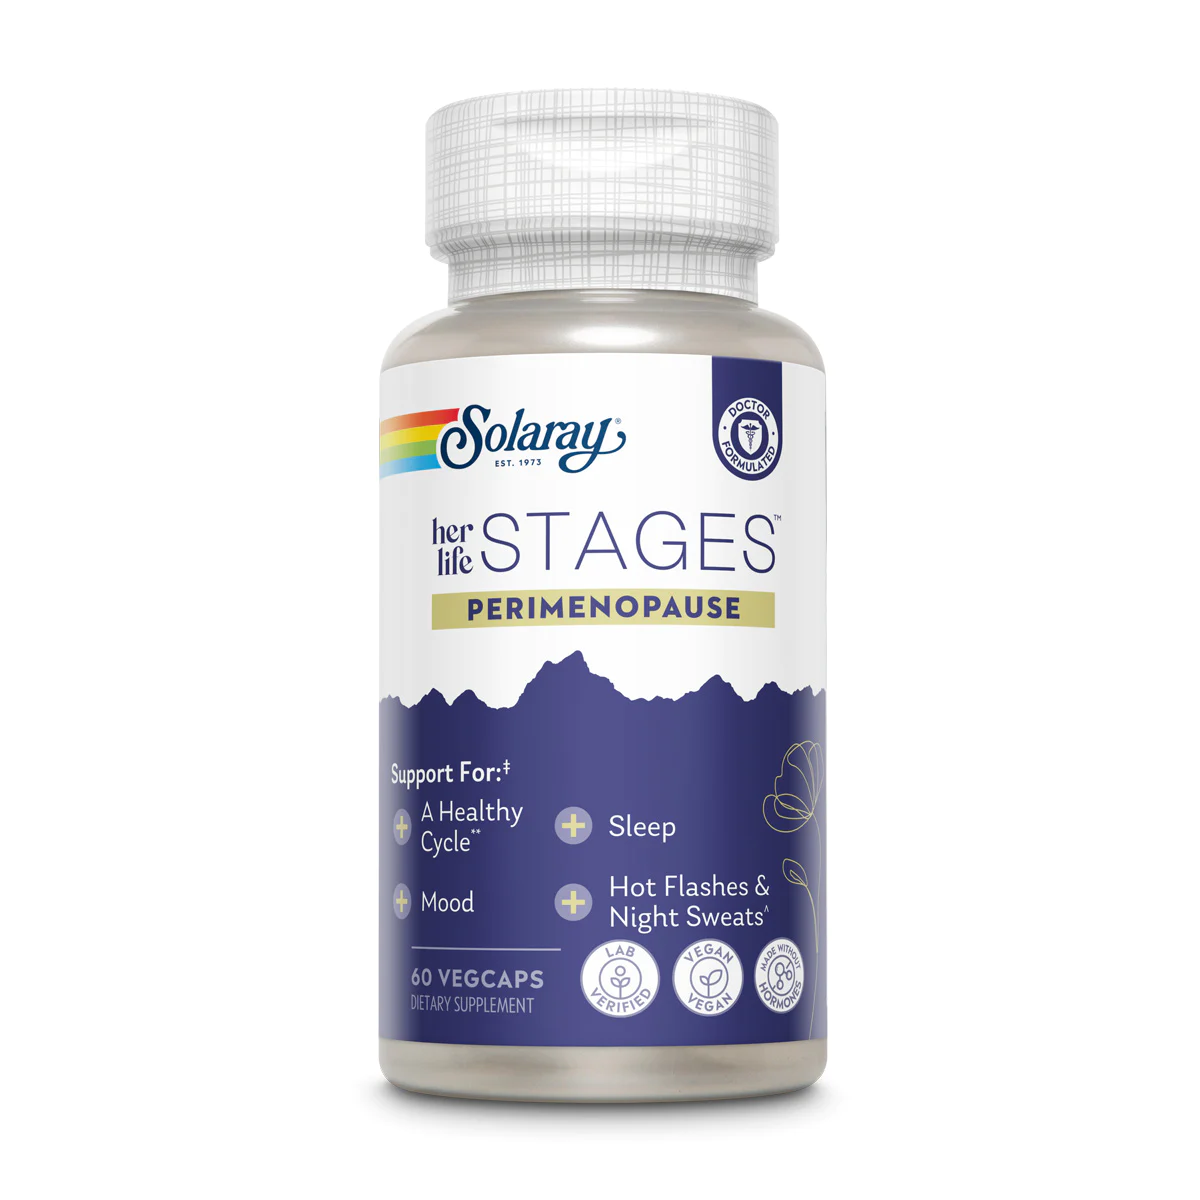 Her Life Stages Perimenopause - Solaray